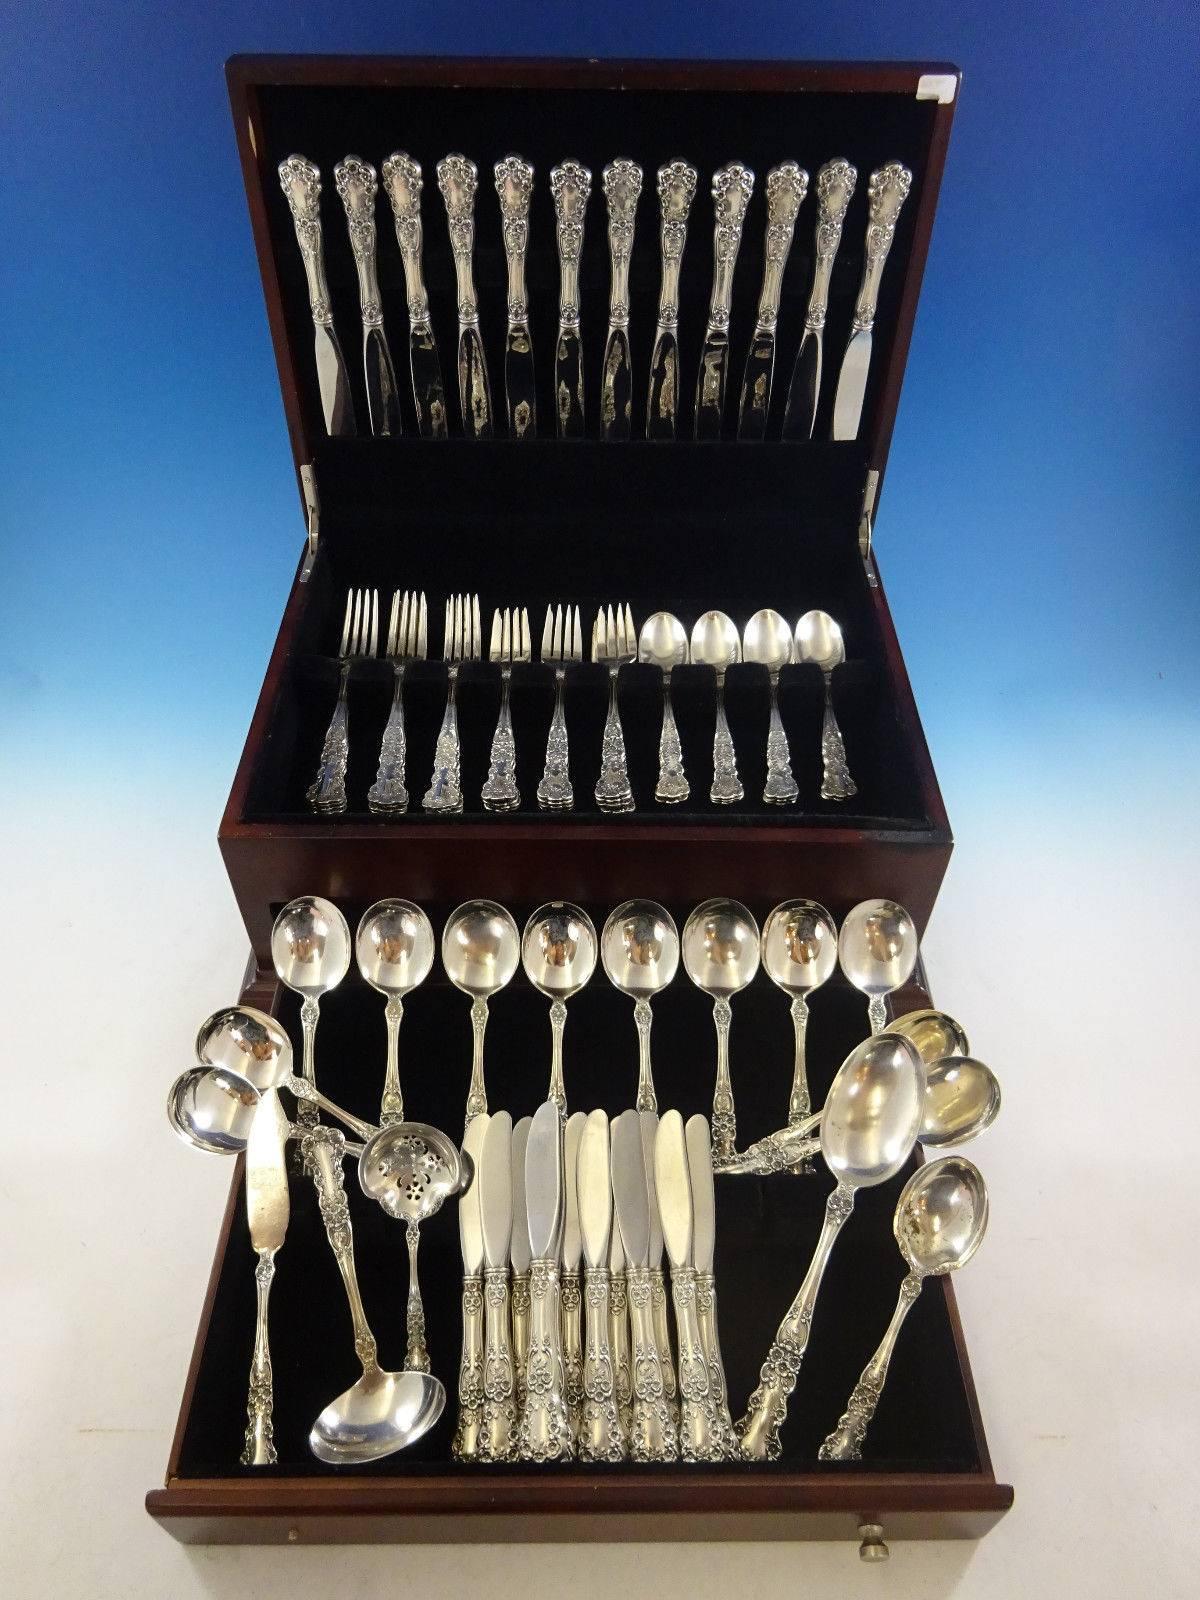 Buttercup by Gorham 78 piece sterling silver flatware set. This set includes:

12 knives, 8 3/4